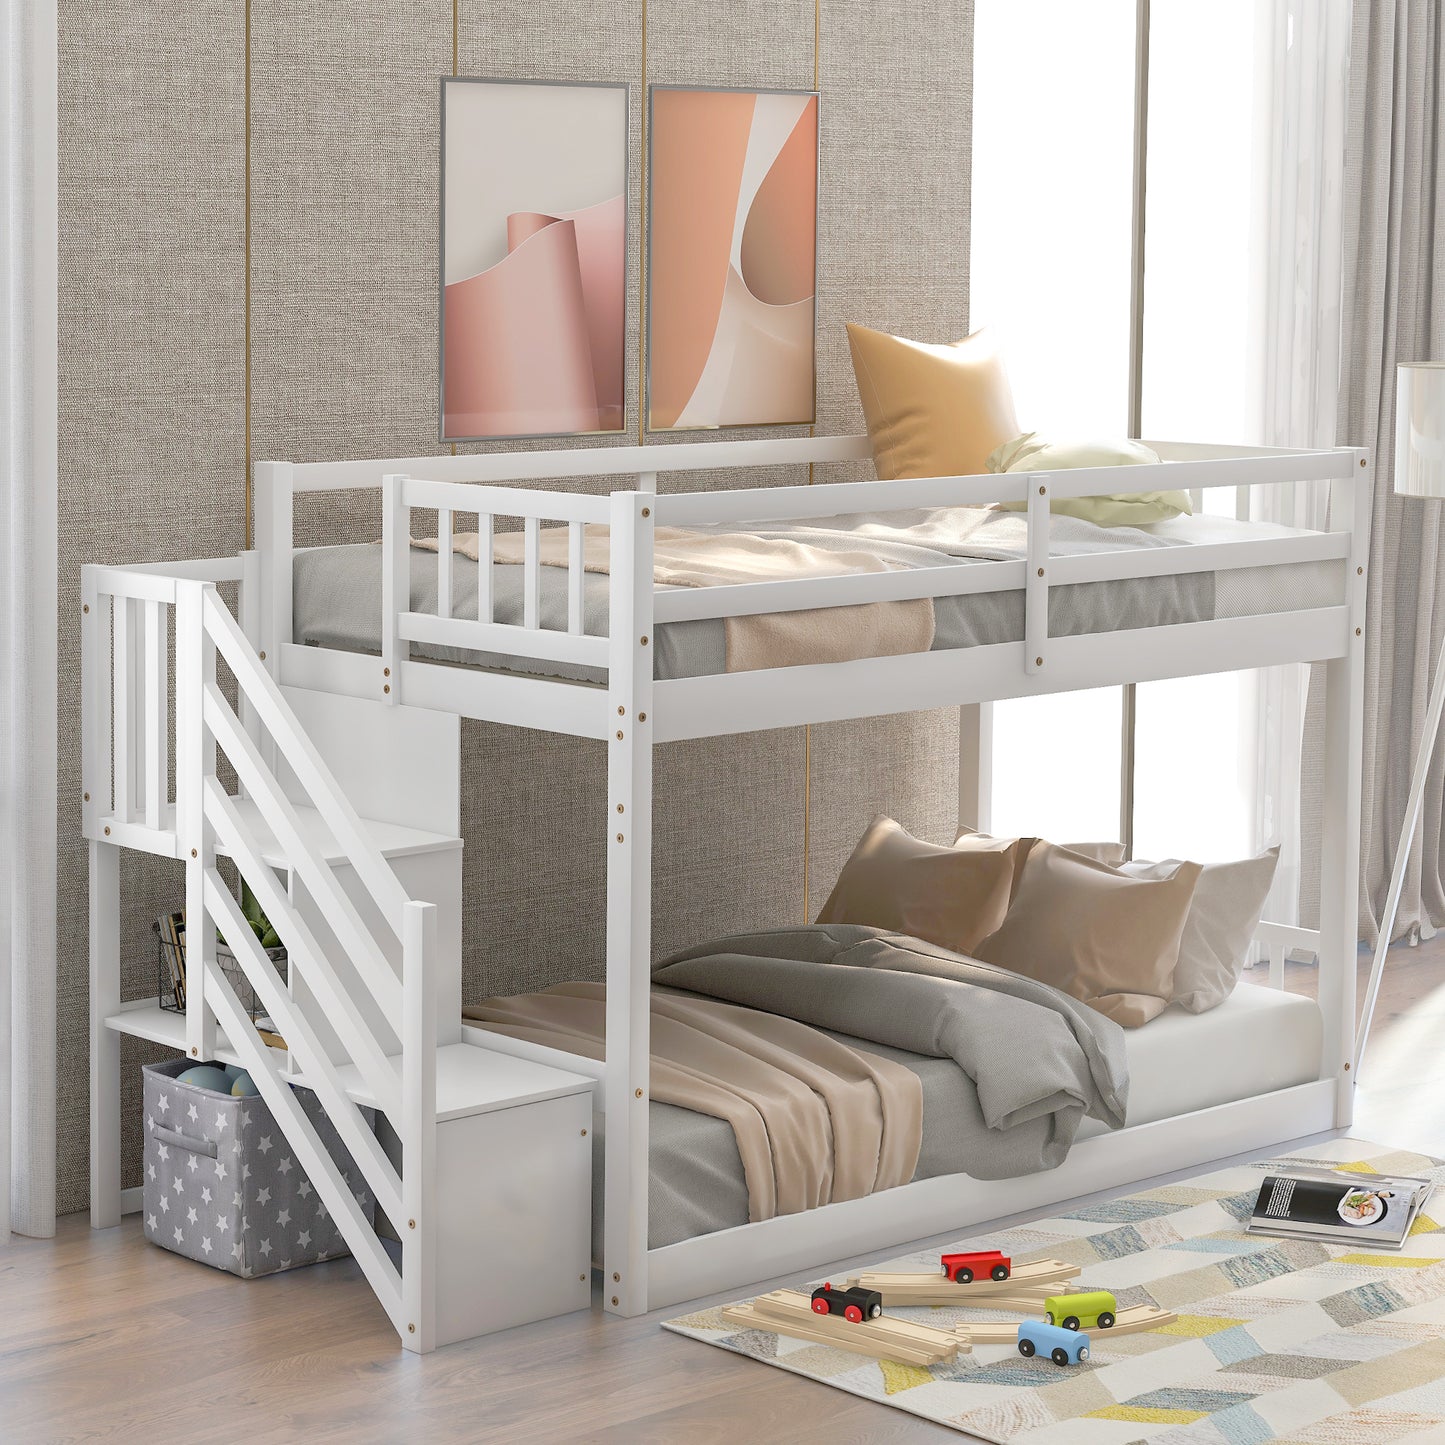 Twin over Twin Floor Bunk Bed, Ladder with Storage, White